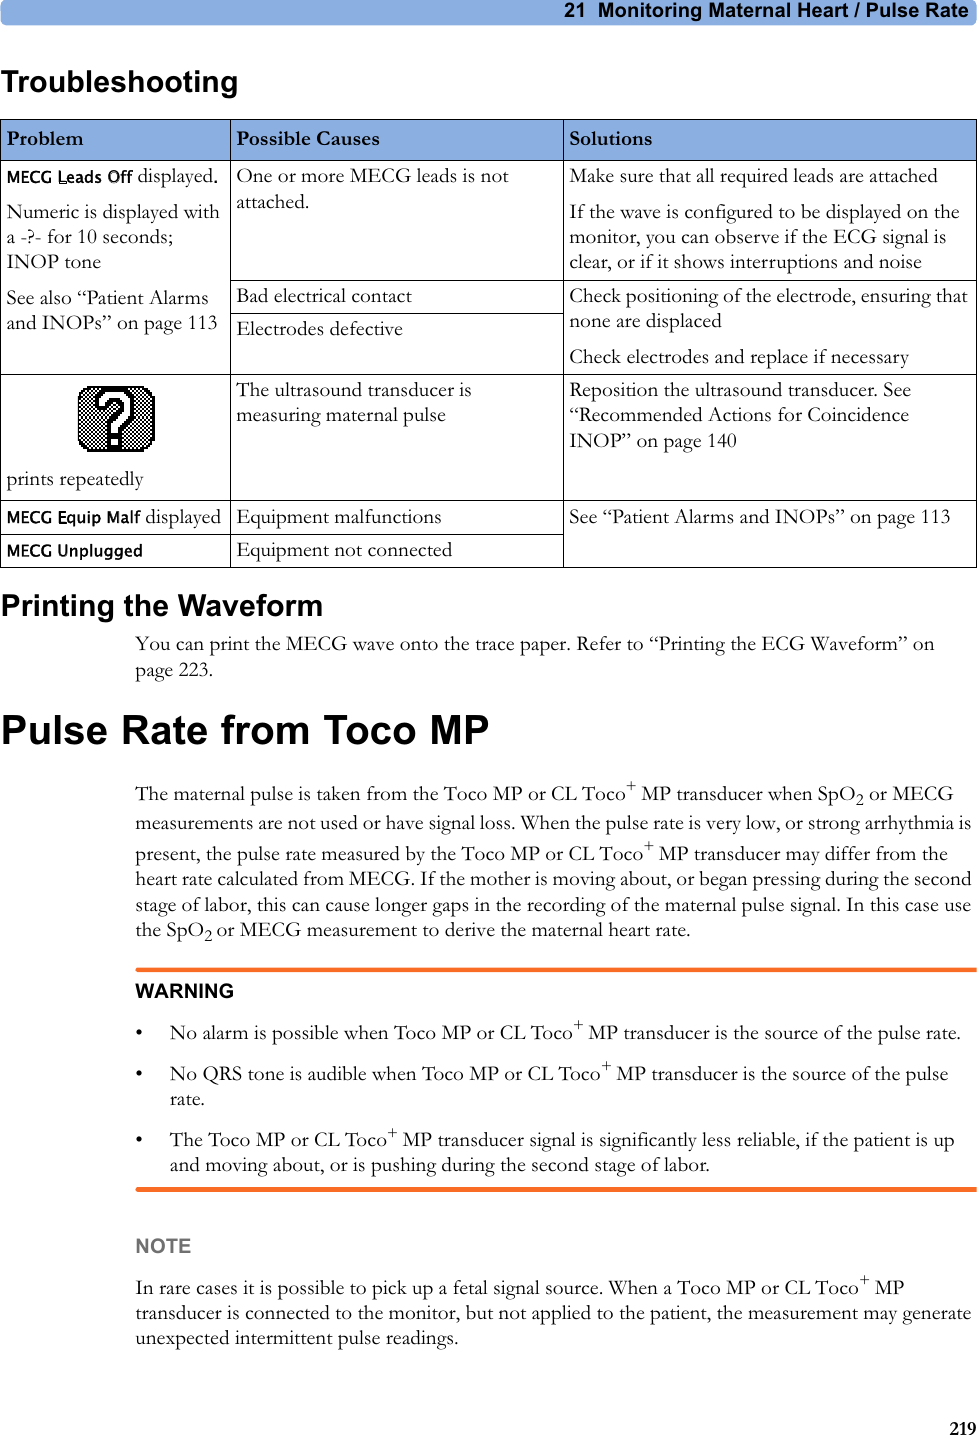 21  Monitoring Maternal Heart / Pulse Rate219TroubleshootingPrinting the WaveformYou can print the MECG wave onto the trace paper. Refer to “Printing the ECG Waveform” on page 223.Pulse Rate from Toco MPThe maternal pulse is taken from the Toco MP or CL Toco+ MP transducer when SpO2 or MECG measurements are not used or have signal loss. When the pulse rate is very low, or strong arrhythmia is present, the pulse rate measured by the Toco MP or CL Toco+ MP transducer may differ from the heart rate calculated from MECG. If the mother is moving about, or began pressing during the second stage of labor, this can cause longer gaps in the recording of the maternal pulse signal. In this case use the SpO2 or MECG measurement to derive the maternal heart rate.WARNING• No alarm is possible when Toco MP or CL Toco+ MP transducer is the source of the pulse rate.• No QRS tone is audible when Toco MP or CL Toco+ MP transducer is the source of the pulse rate.• The Toco MP or CL Toco+ MP transducer signal is significantly less reliable, if the patient is up and moving about, or is pushing during the second stage of labor.NOTEIn rare cases it is possible to pick up a fetal signal source. When a Toco MP or CL Toco+ MP transducer is connected to the monitor, but not applied to the patient, the measurement may generate unexpected intermittent pulse readings.Problem Possible Causes SolutionsMECG Leads Off displayed.Numeric is displayed with a -?- for 10 seconds; INOP toneSee also “Patient Alarms and INOPs” on page 113One or more MECG leads is not attached.Make sure that all required leads are attachedIf the wave is configured to be displayed on the monitor, you can observe if the ECG signal is clear, or if it shows interruptions and noiseBad electrical contact Check positioning of the electrode, ensuring that none are displacedCheck electrodes and replace if necessaryElectrodes defectiveprints repeatedlyThe ultrasound transducer is measuring maternal pulseReposition the ultrasound transducer. See “Recommended Actions for Coincidence INOP” on page 140MECG Equip Malf displayed Equipment malfunctions See “Patient Alarms and INOPs” on page 113MECG Unplugged Equipment not connected